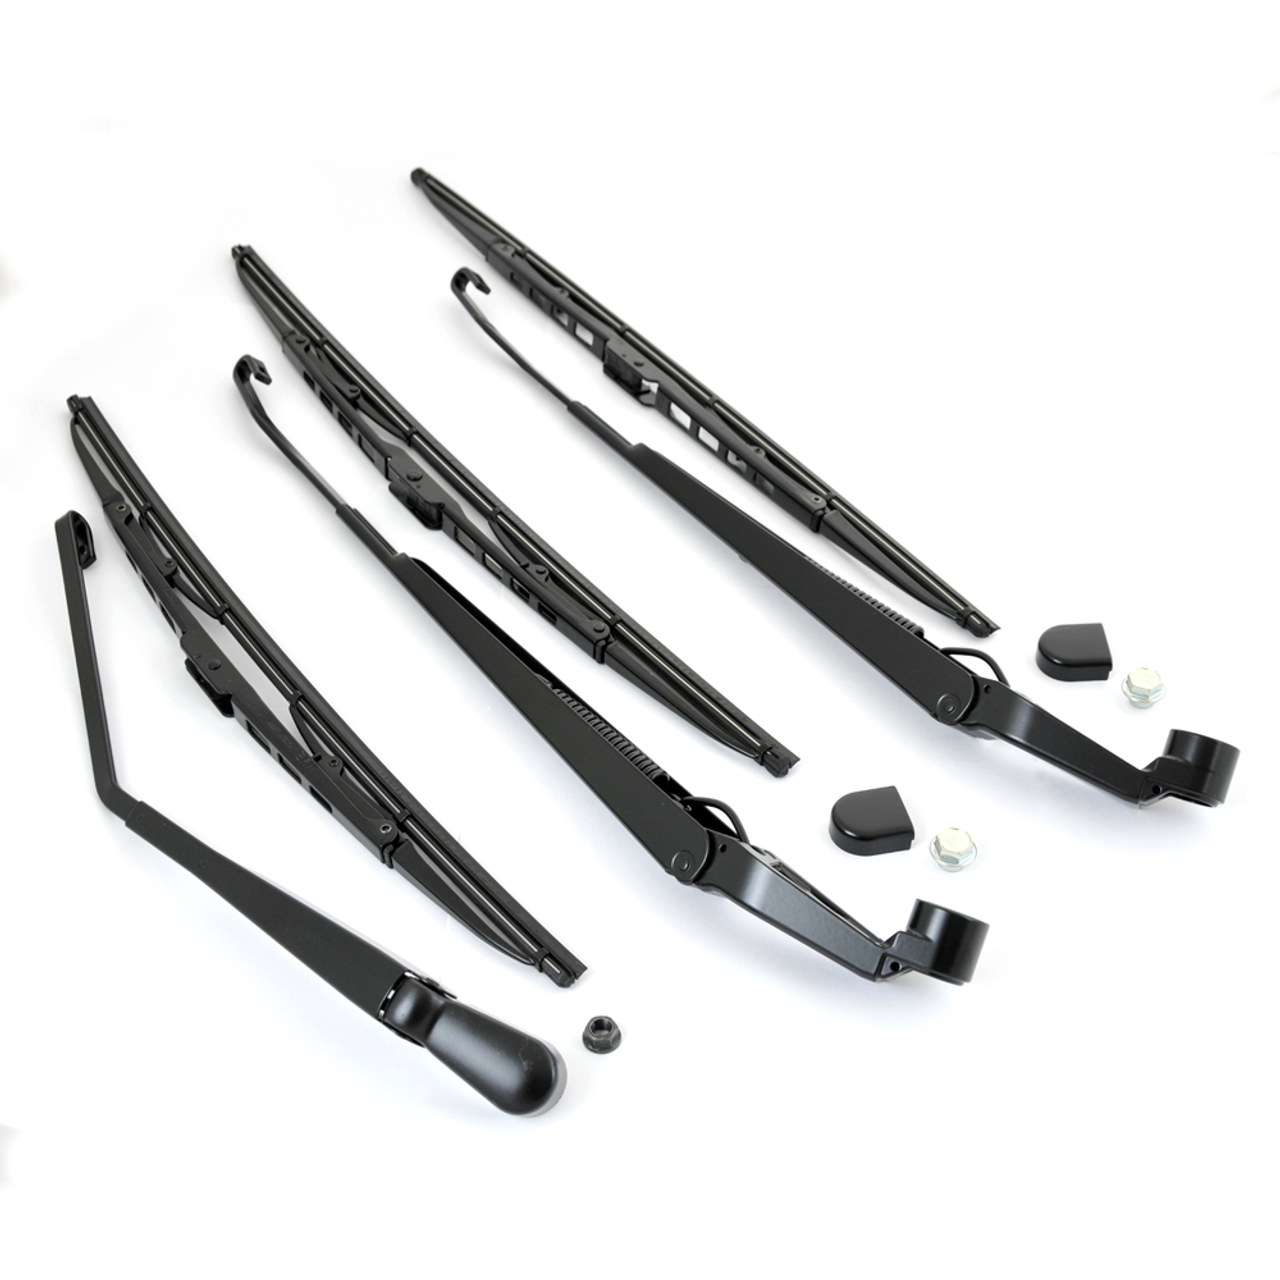 80 Series Complete 3-Wiper Arm Assembly Kit (WAA-1K)